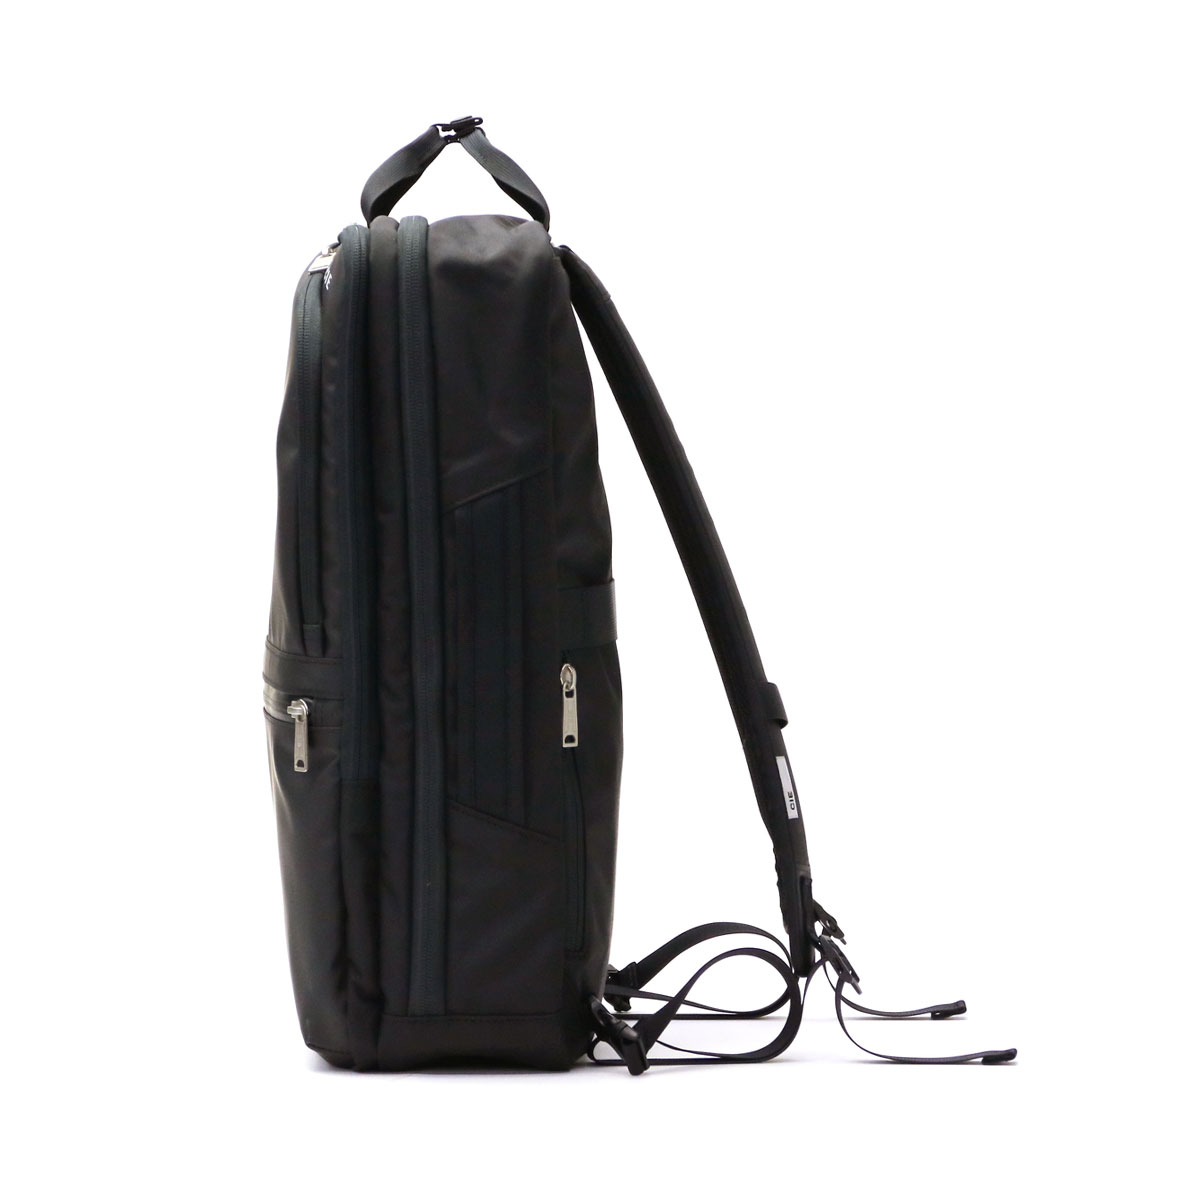 CIE シー VARIOUS 2WAY BACKPACK バックパック 021804｜【正規販売店 ...